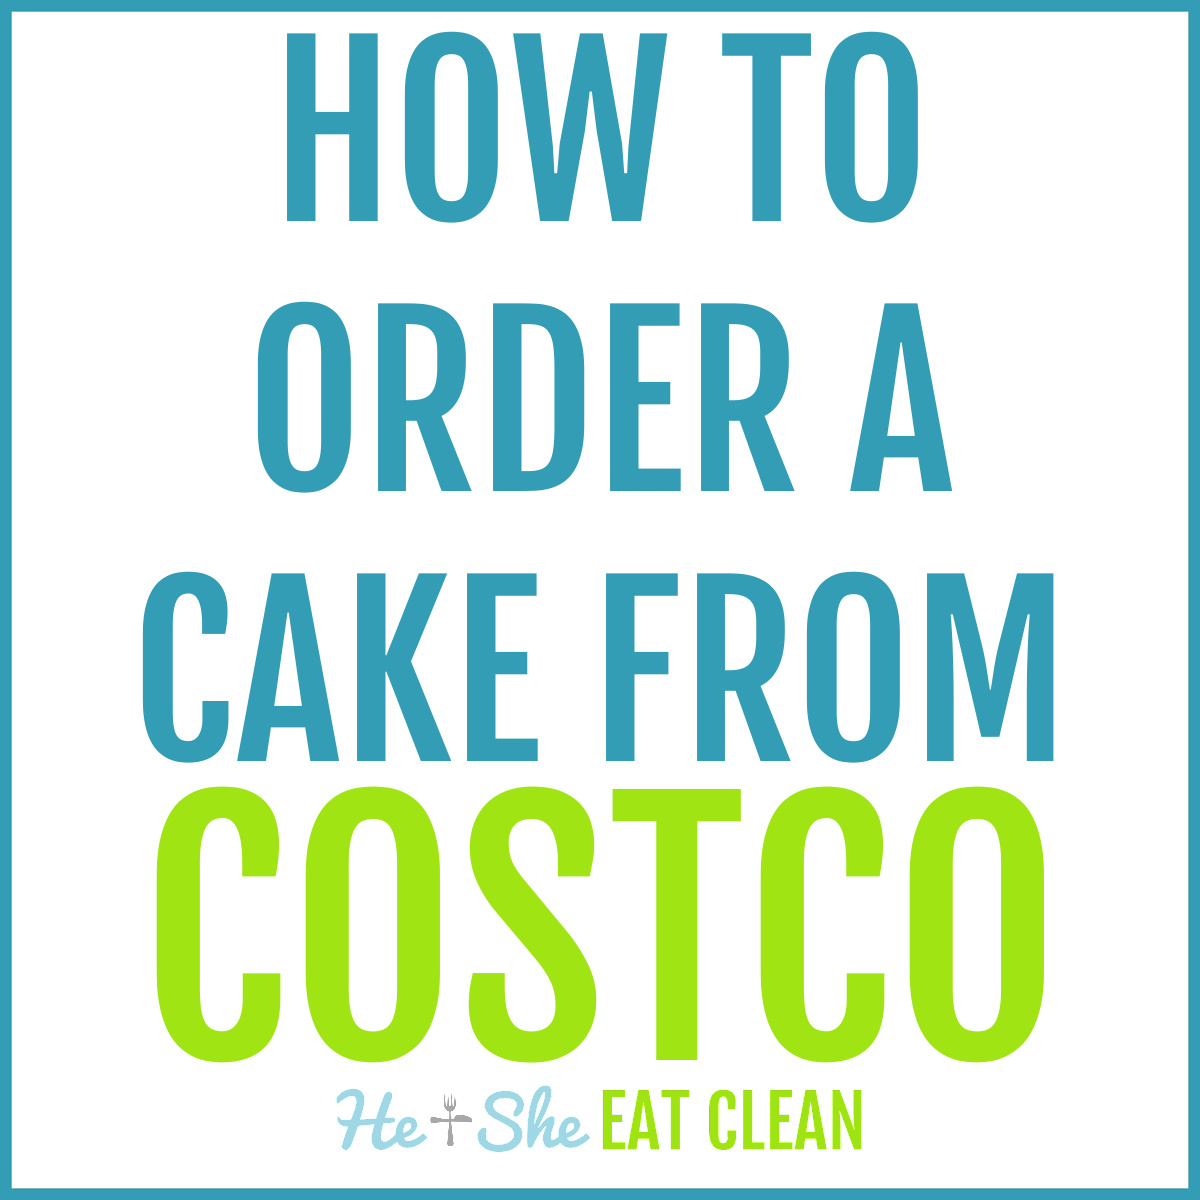 blue text reads how to order a cake from Costco (Costco in green text)